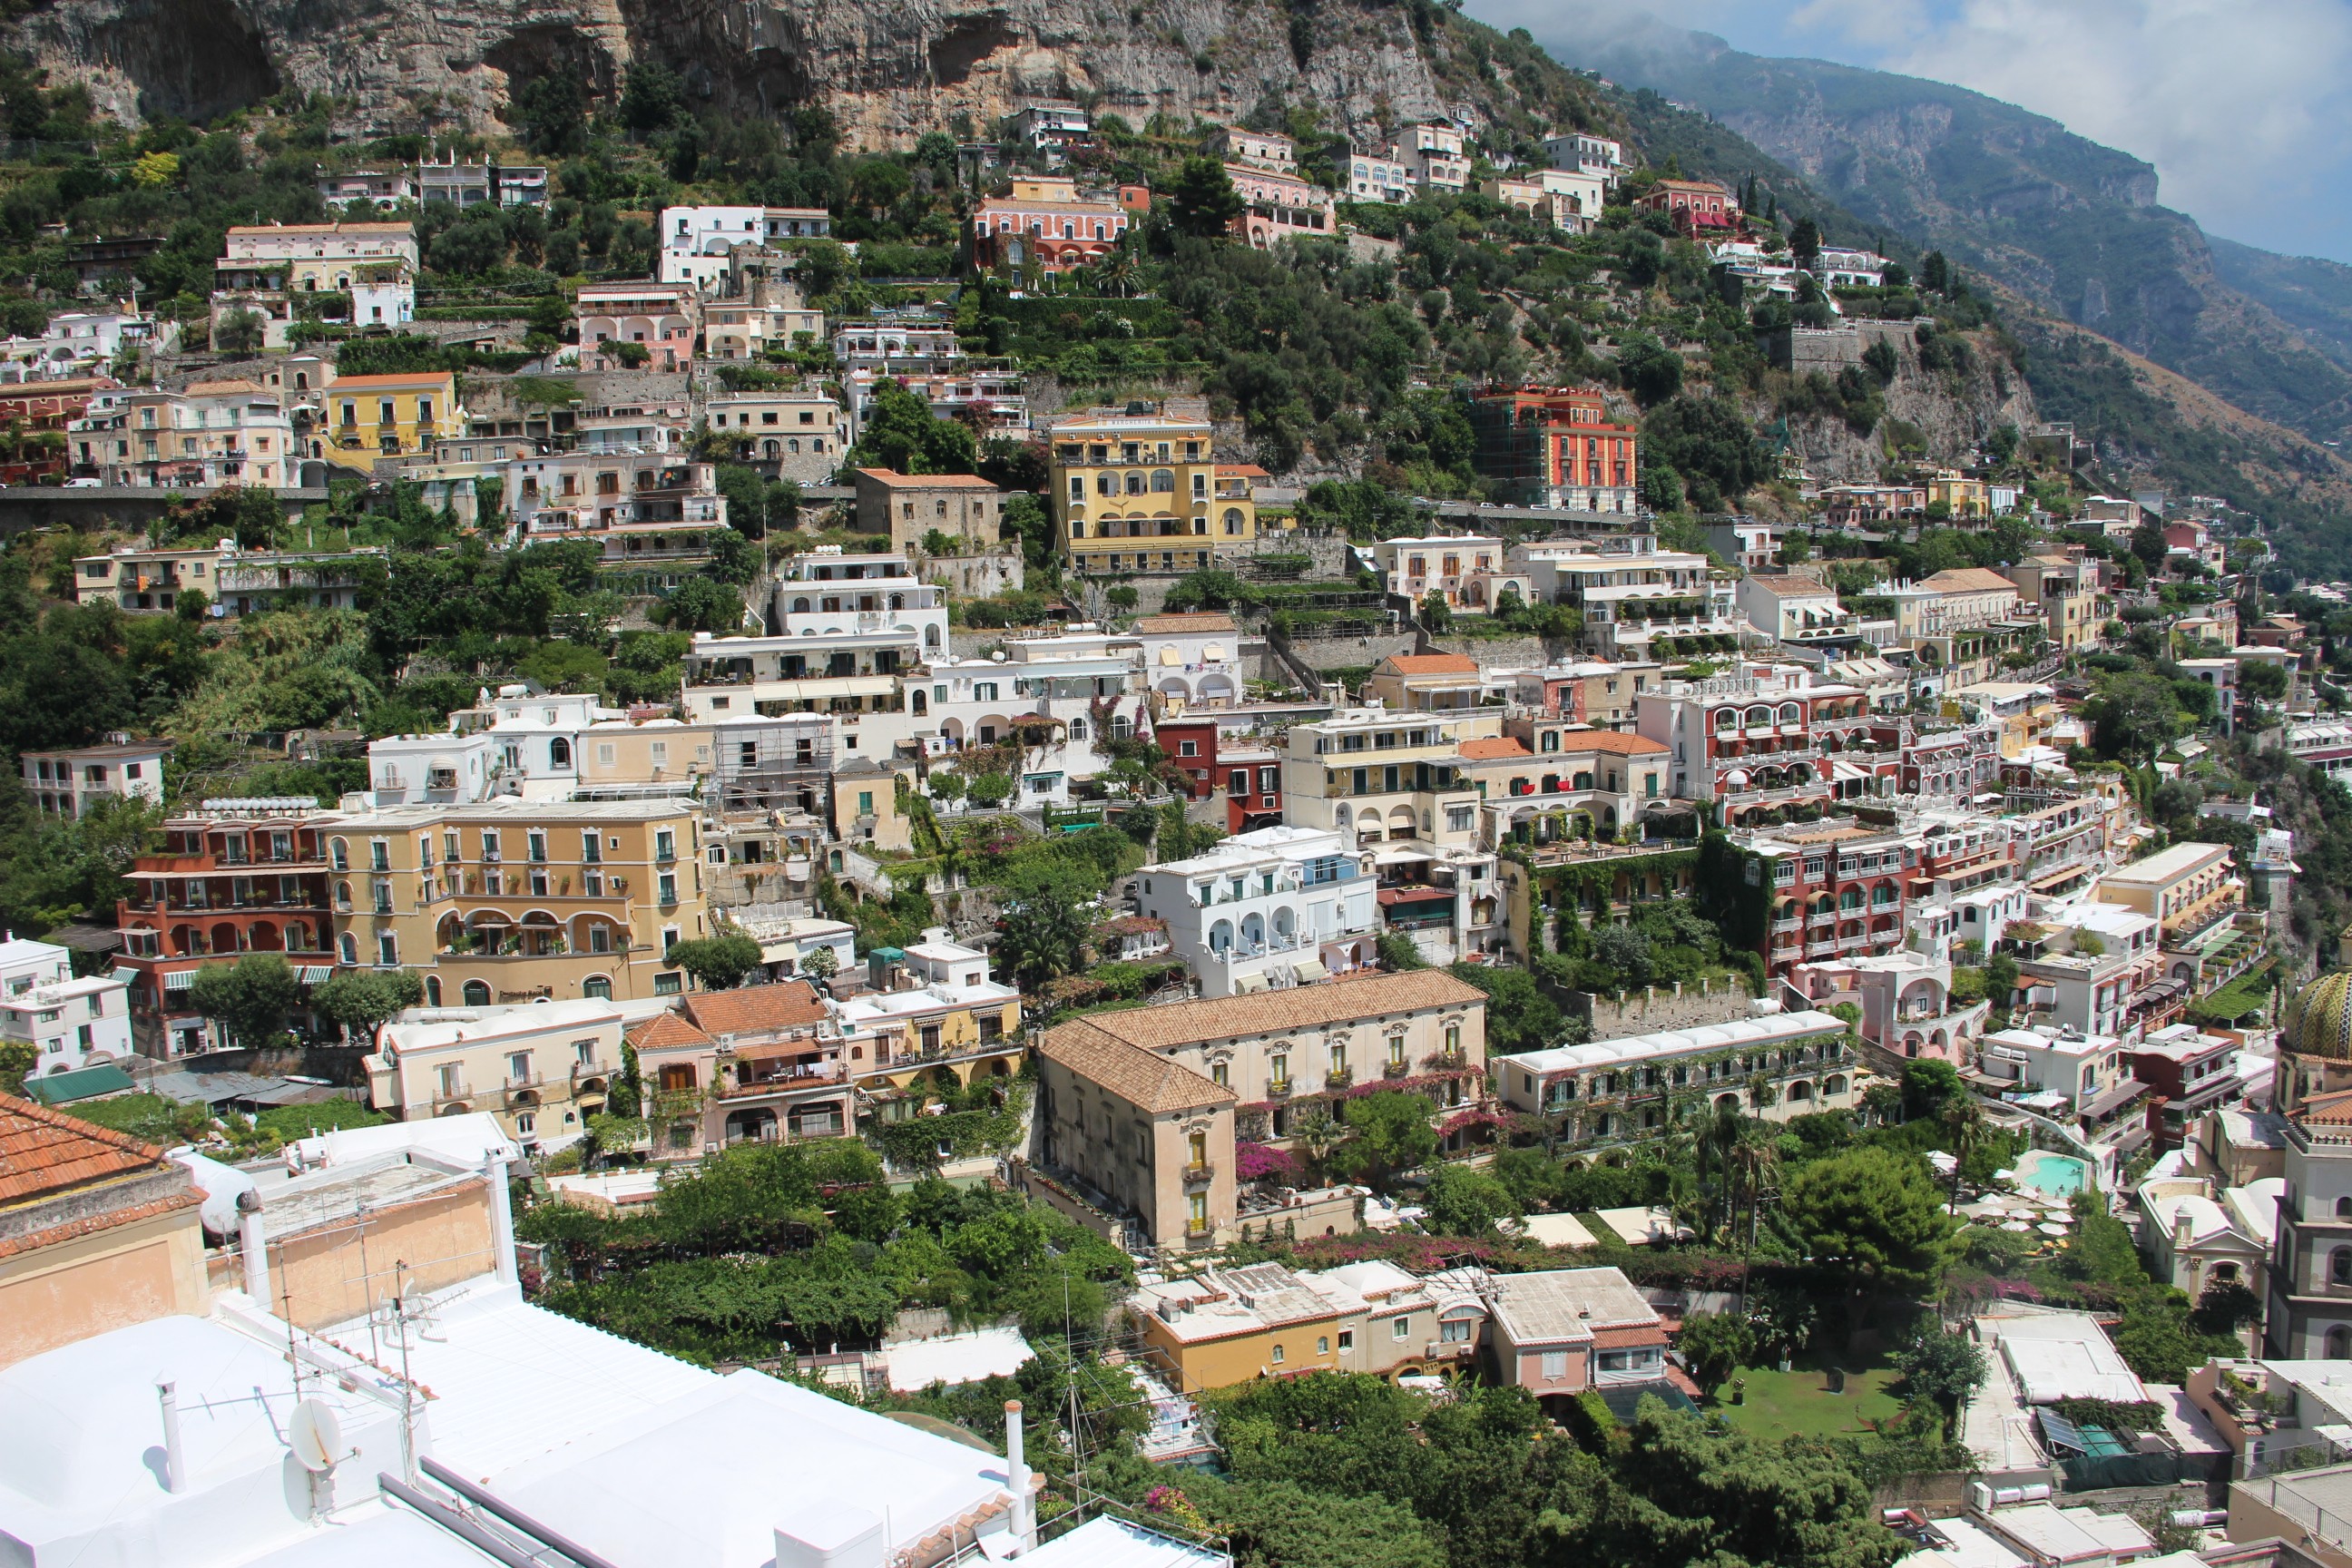 Positano: A Guide To Get There